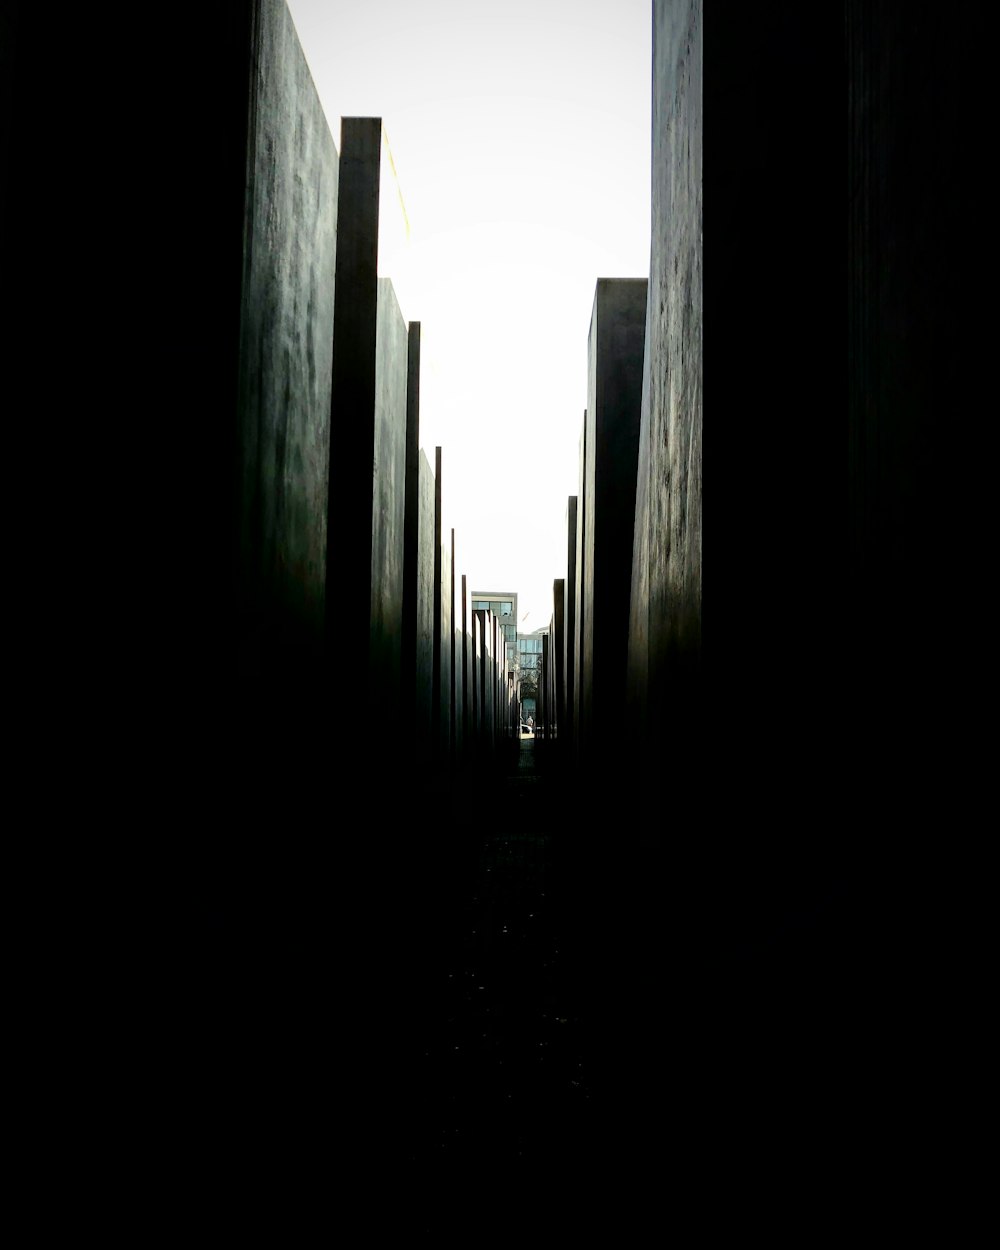 silhouette of person walking on pathway between high rise buildings during daytime